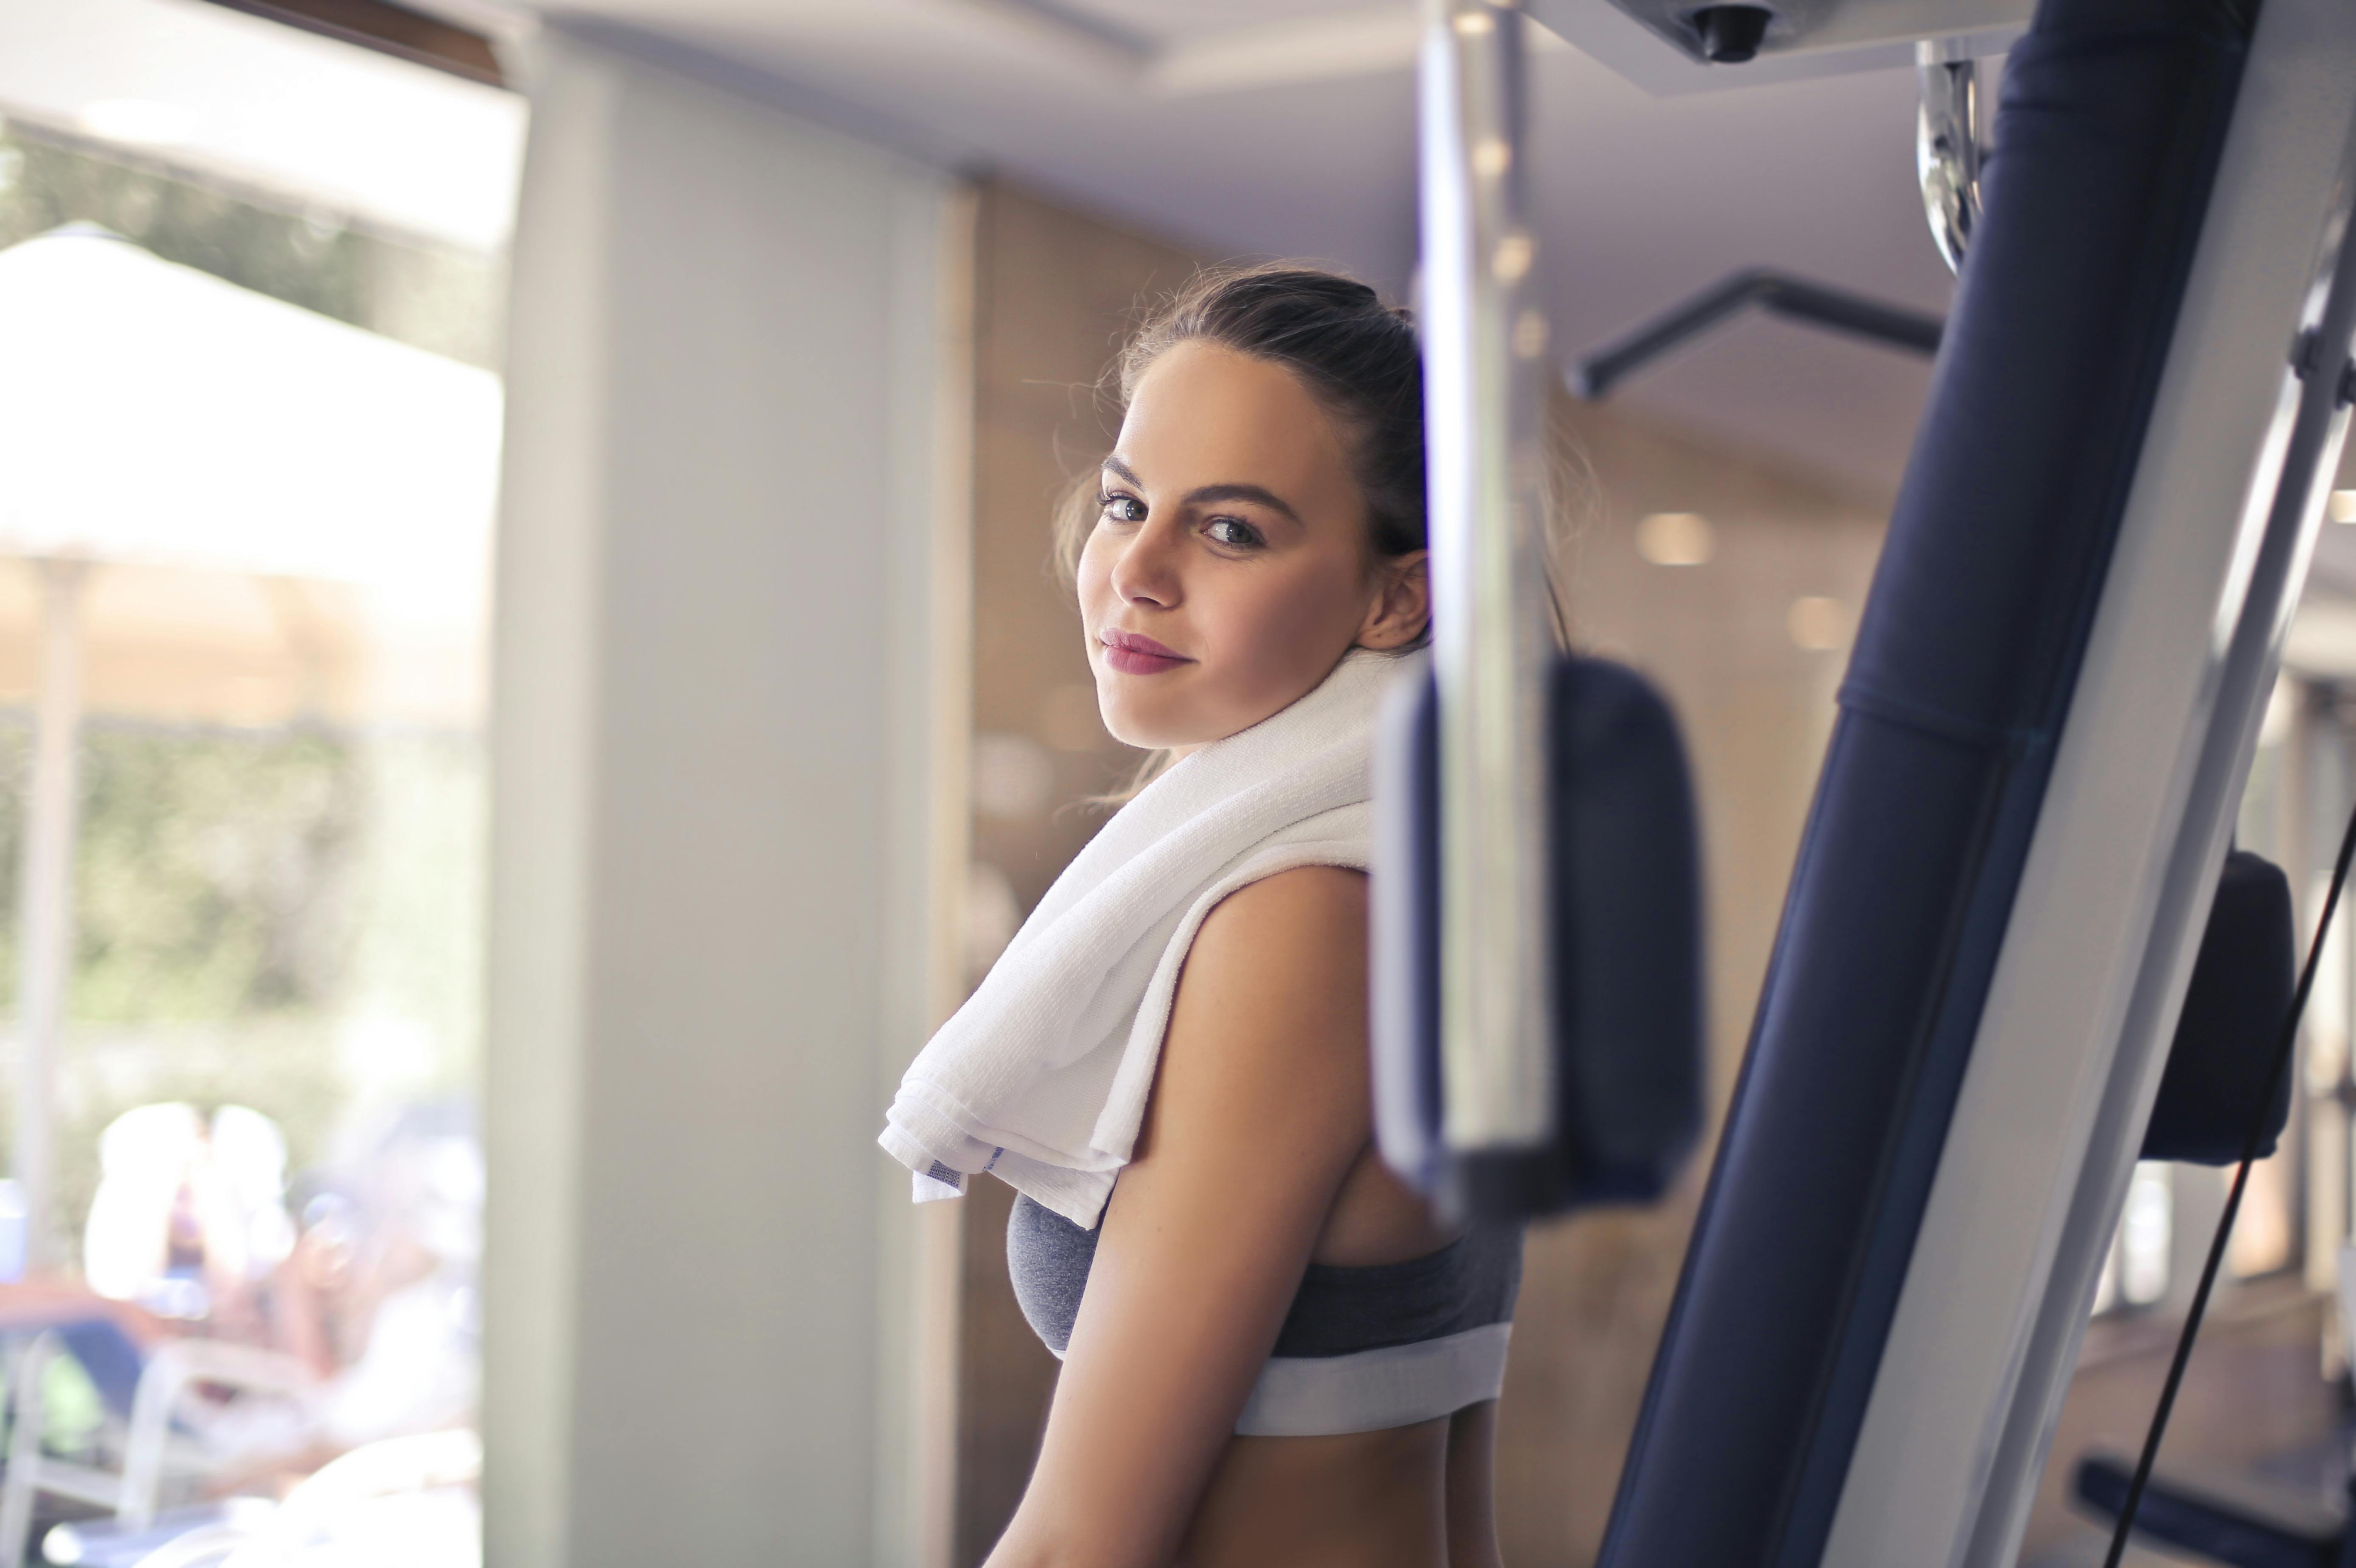 Happy woman at the gym | Source: Pexels